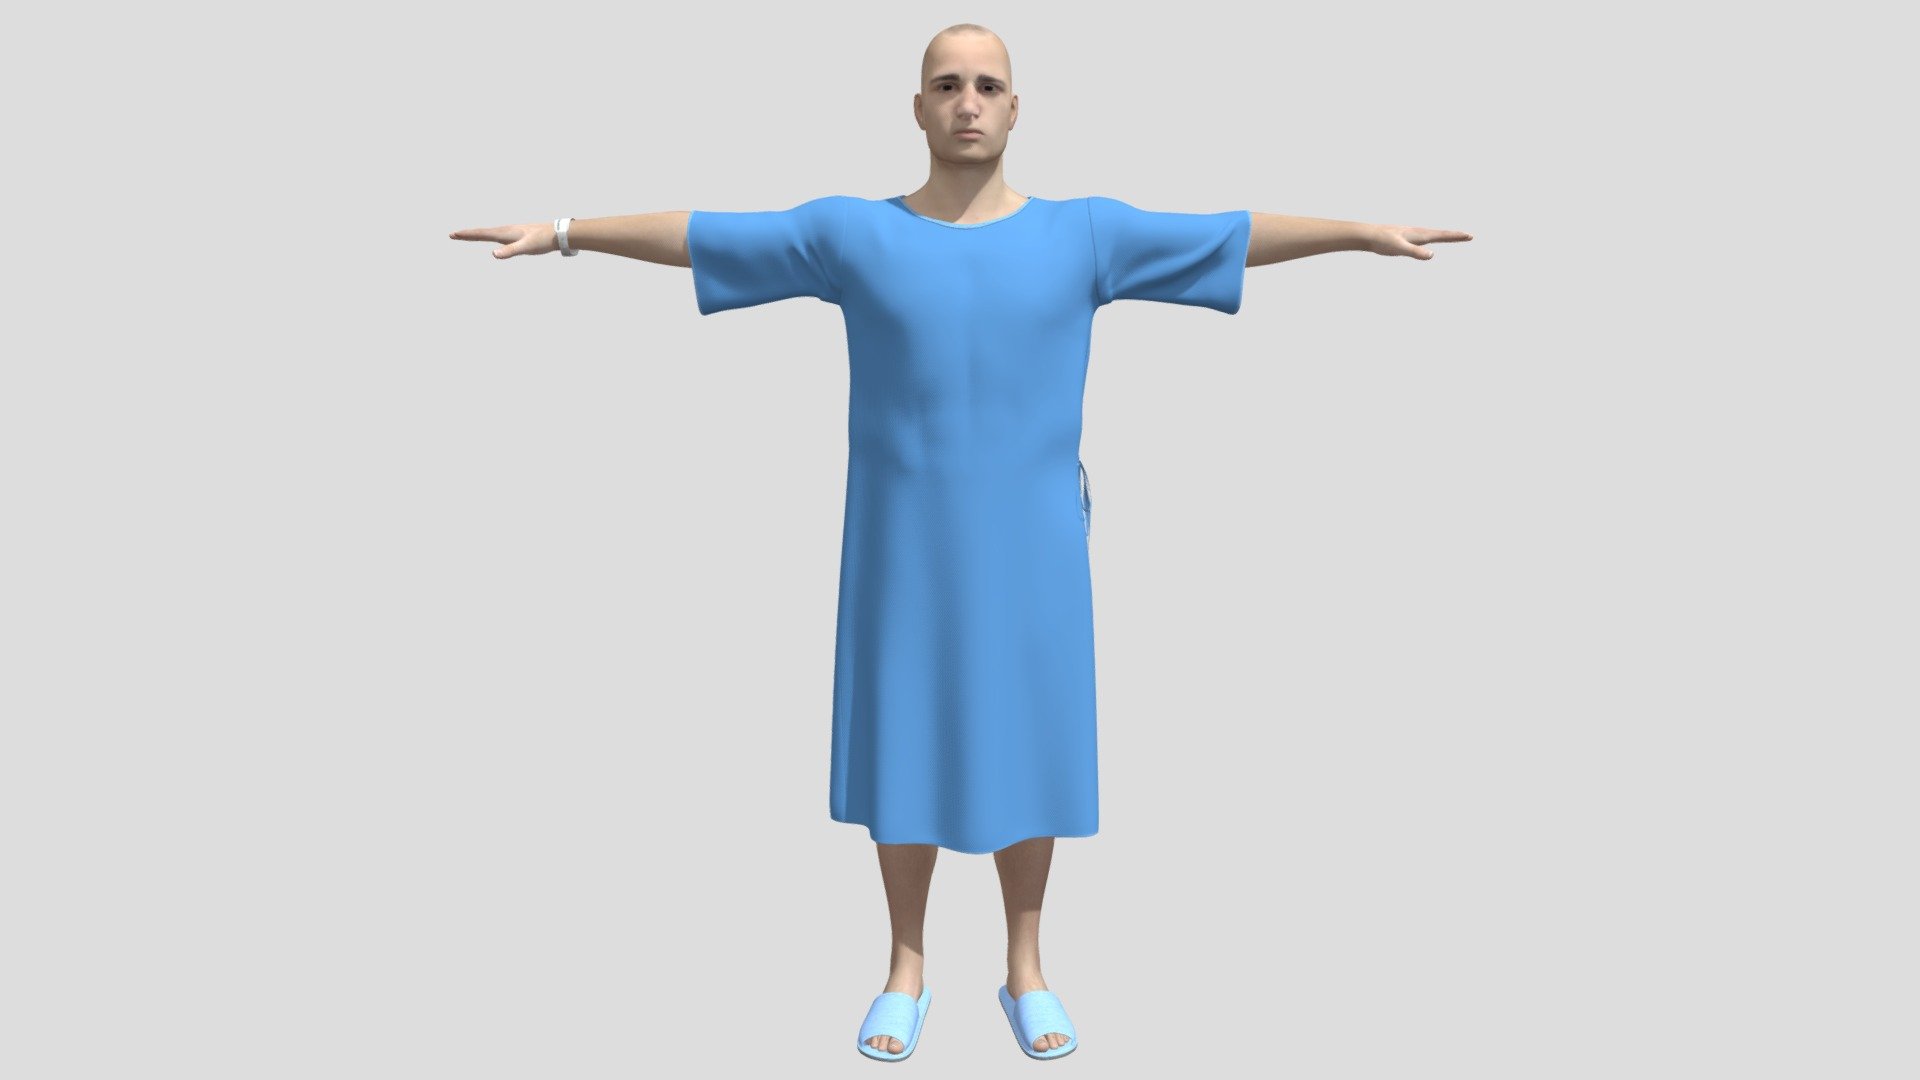 Patient with white gown 3D model is a high quality, photo real model that will enhance detail and realism to any of your game projects or commercials. The model has a fully textured, detailed design that allows for close-up renders 3d model